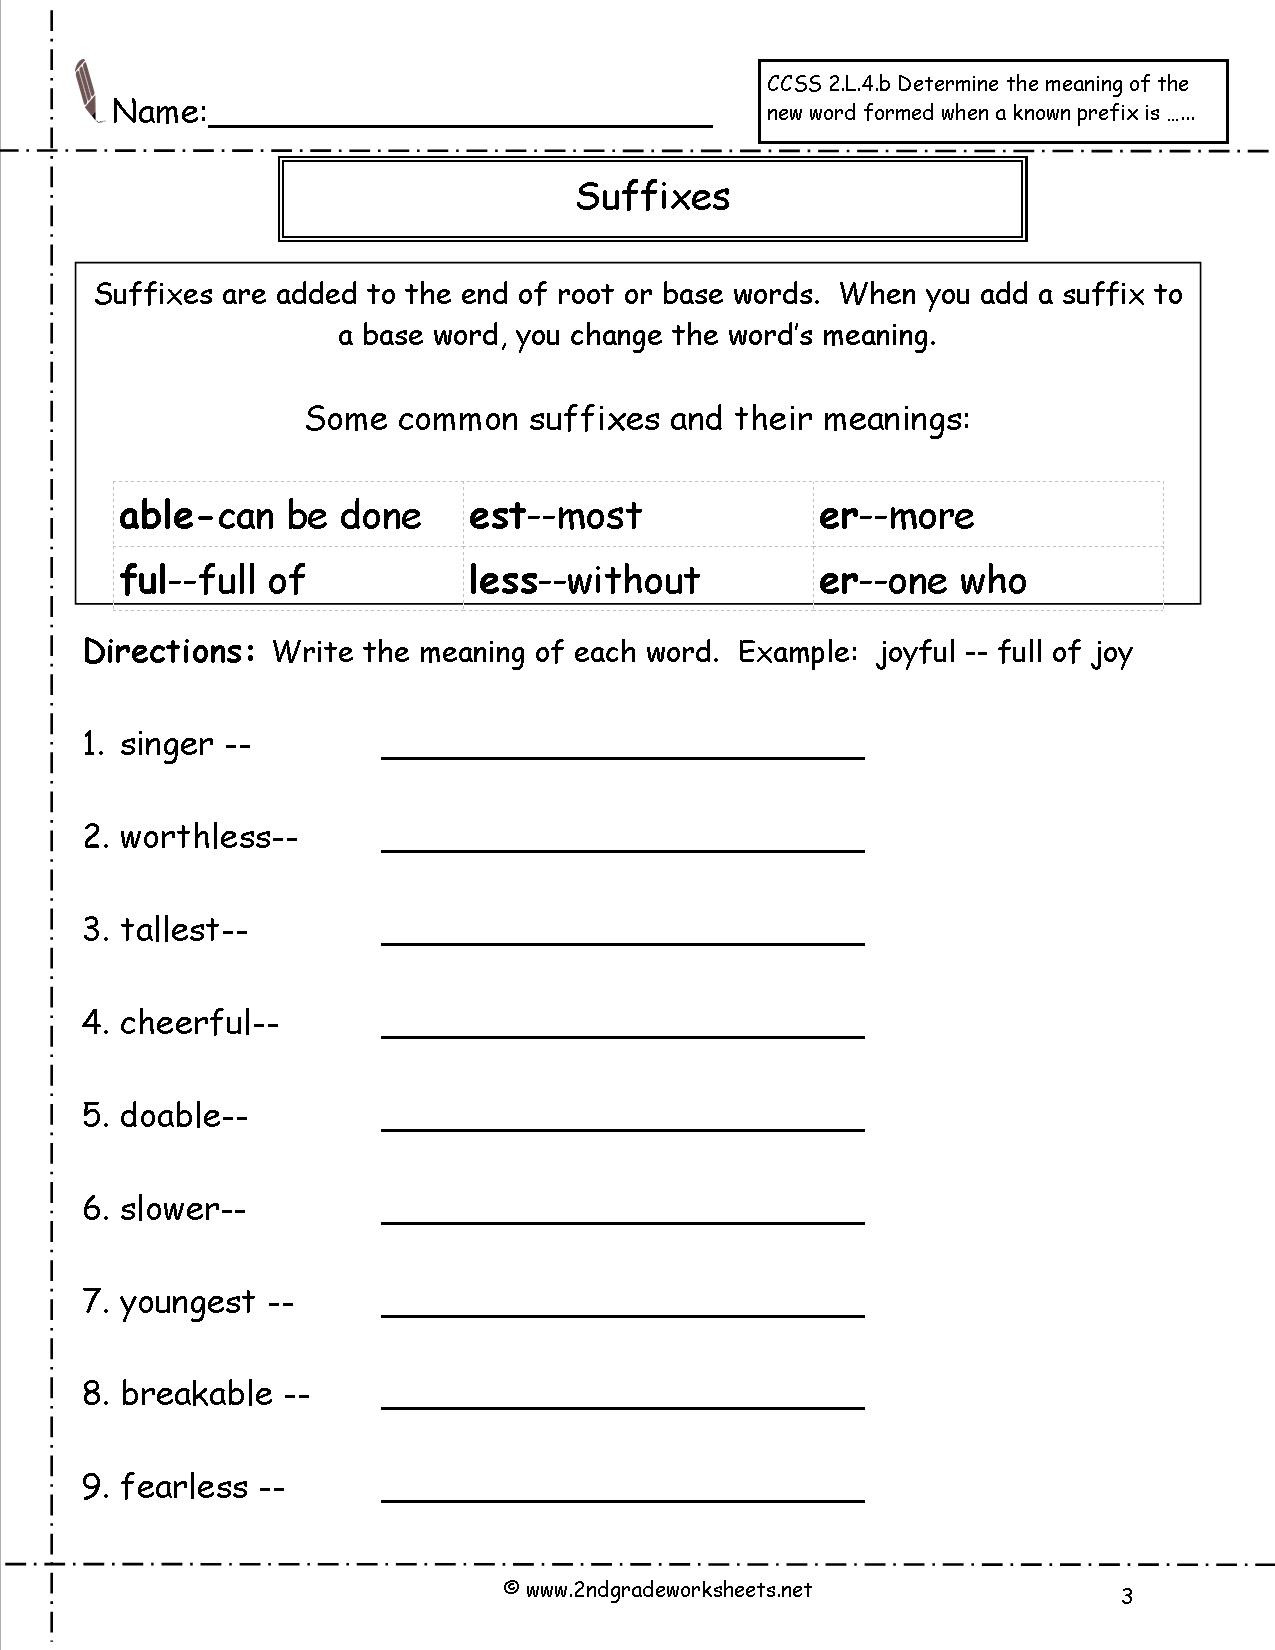 Suffixes Worksheets for 2nd Grade Second Grade Prefixes Worksheets